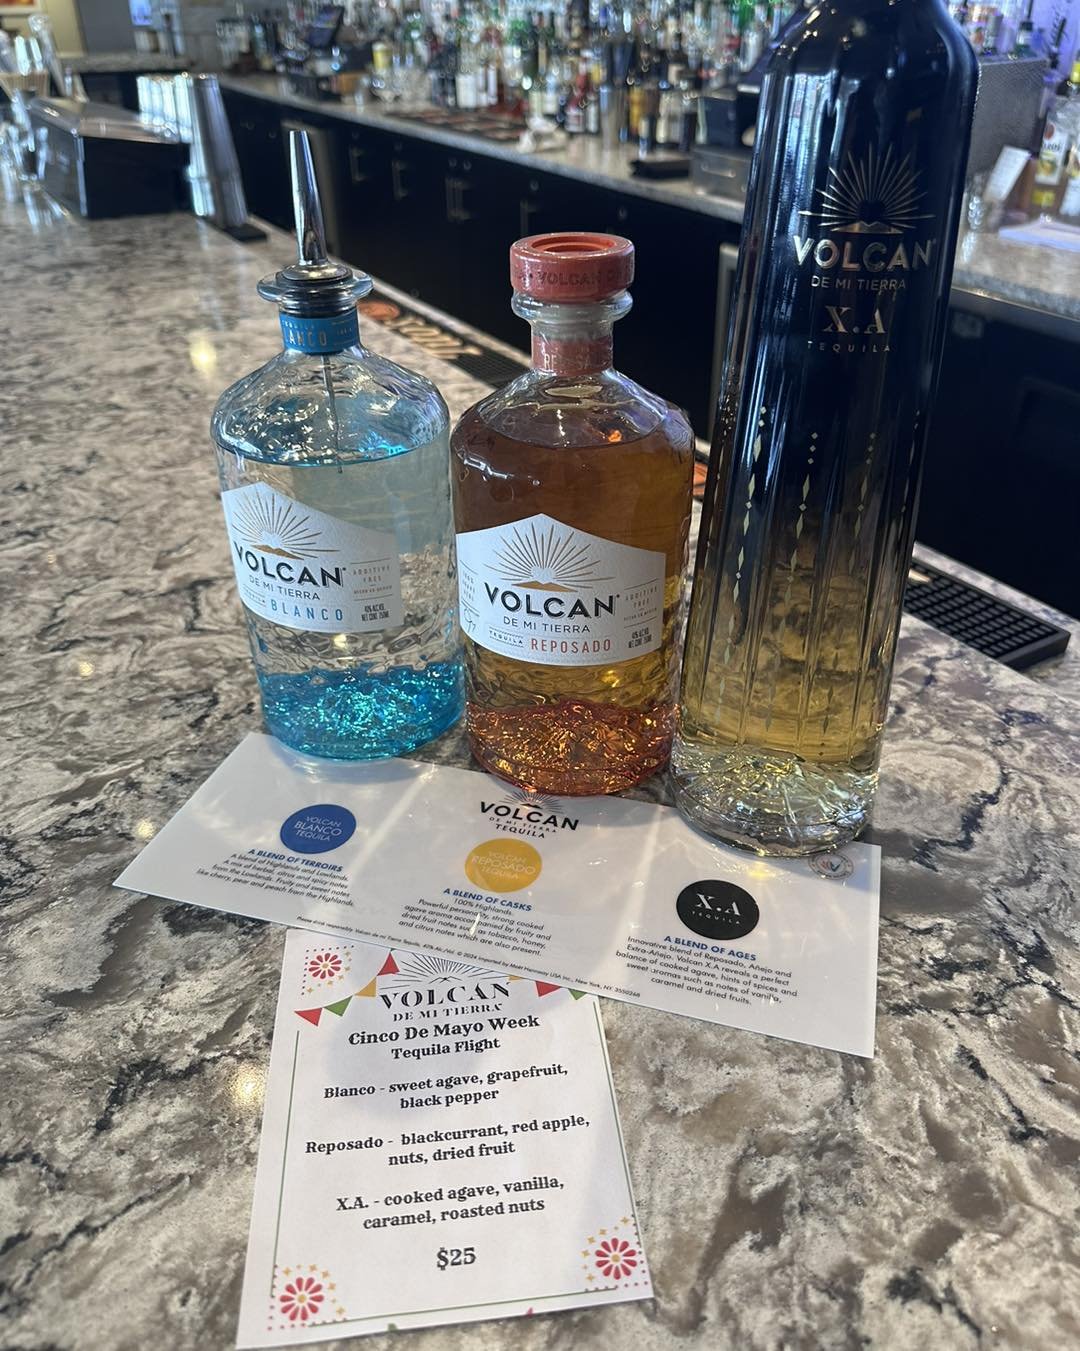 We&rsquo;re celebrating Cinco de Mayo all week with Volcan Tequila. Check out our drink specials.
.
.
.
#roc #rochesterny #drinkspecials #tequila #cincodemayo #tequilatequila